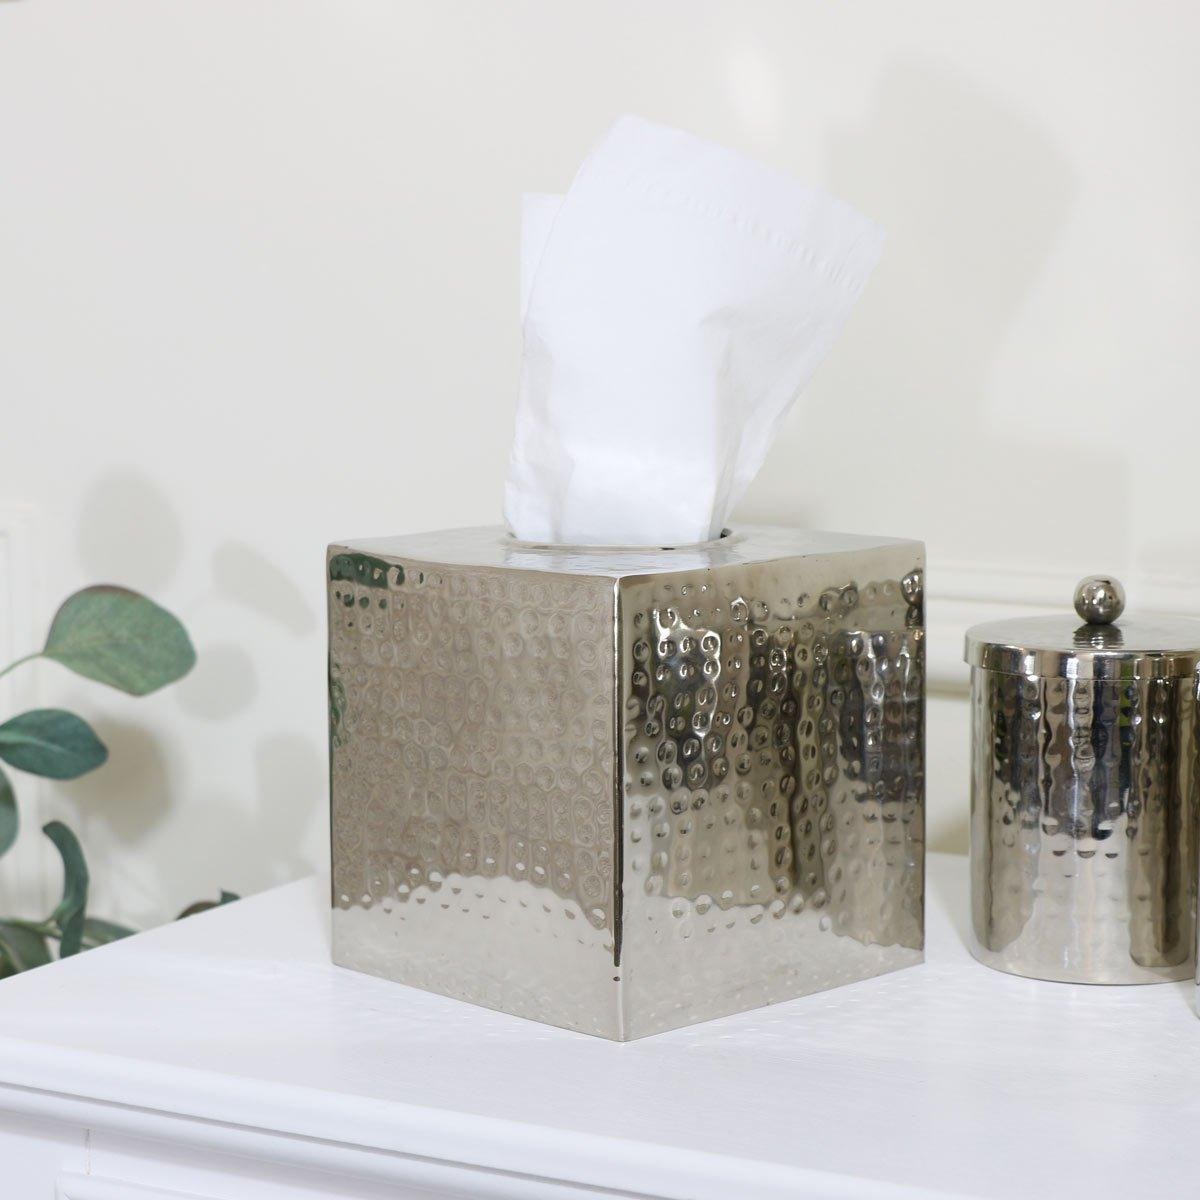 Hammered Silver Metal Tissue Box - image 1